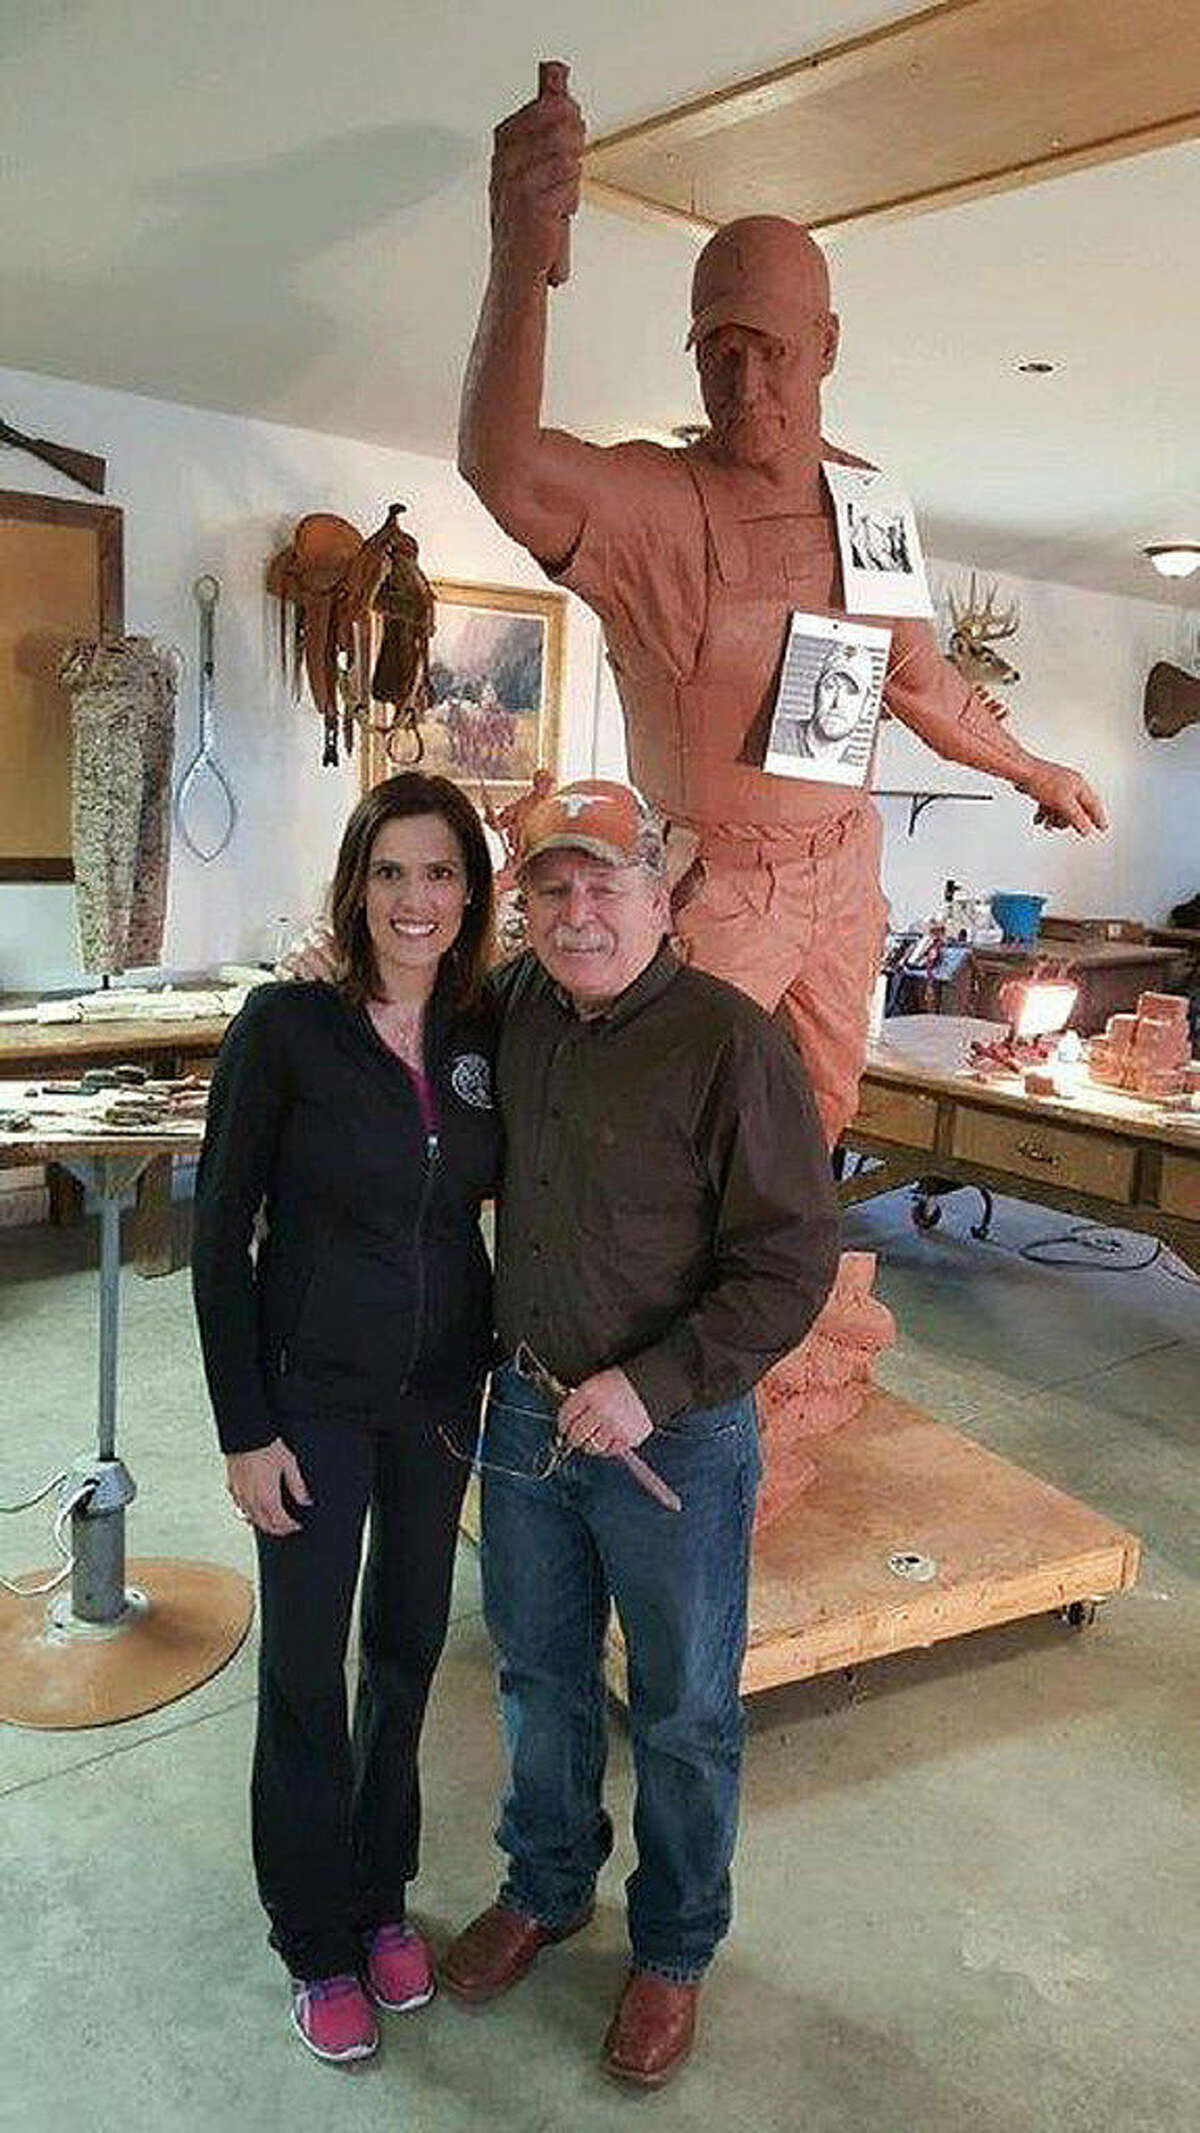 Taya Kyle, widow of Chris Kyle, poses with sculptor Vic Payne, who created the 15-foot statue that will be part of the memorial to the former Navy SEAL.